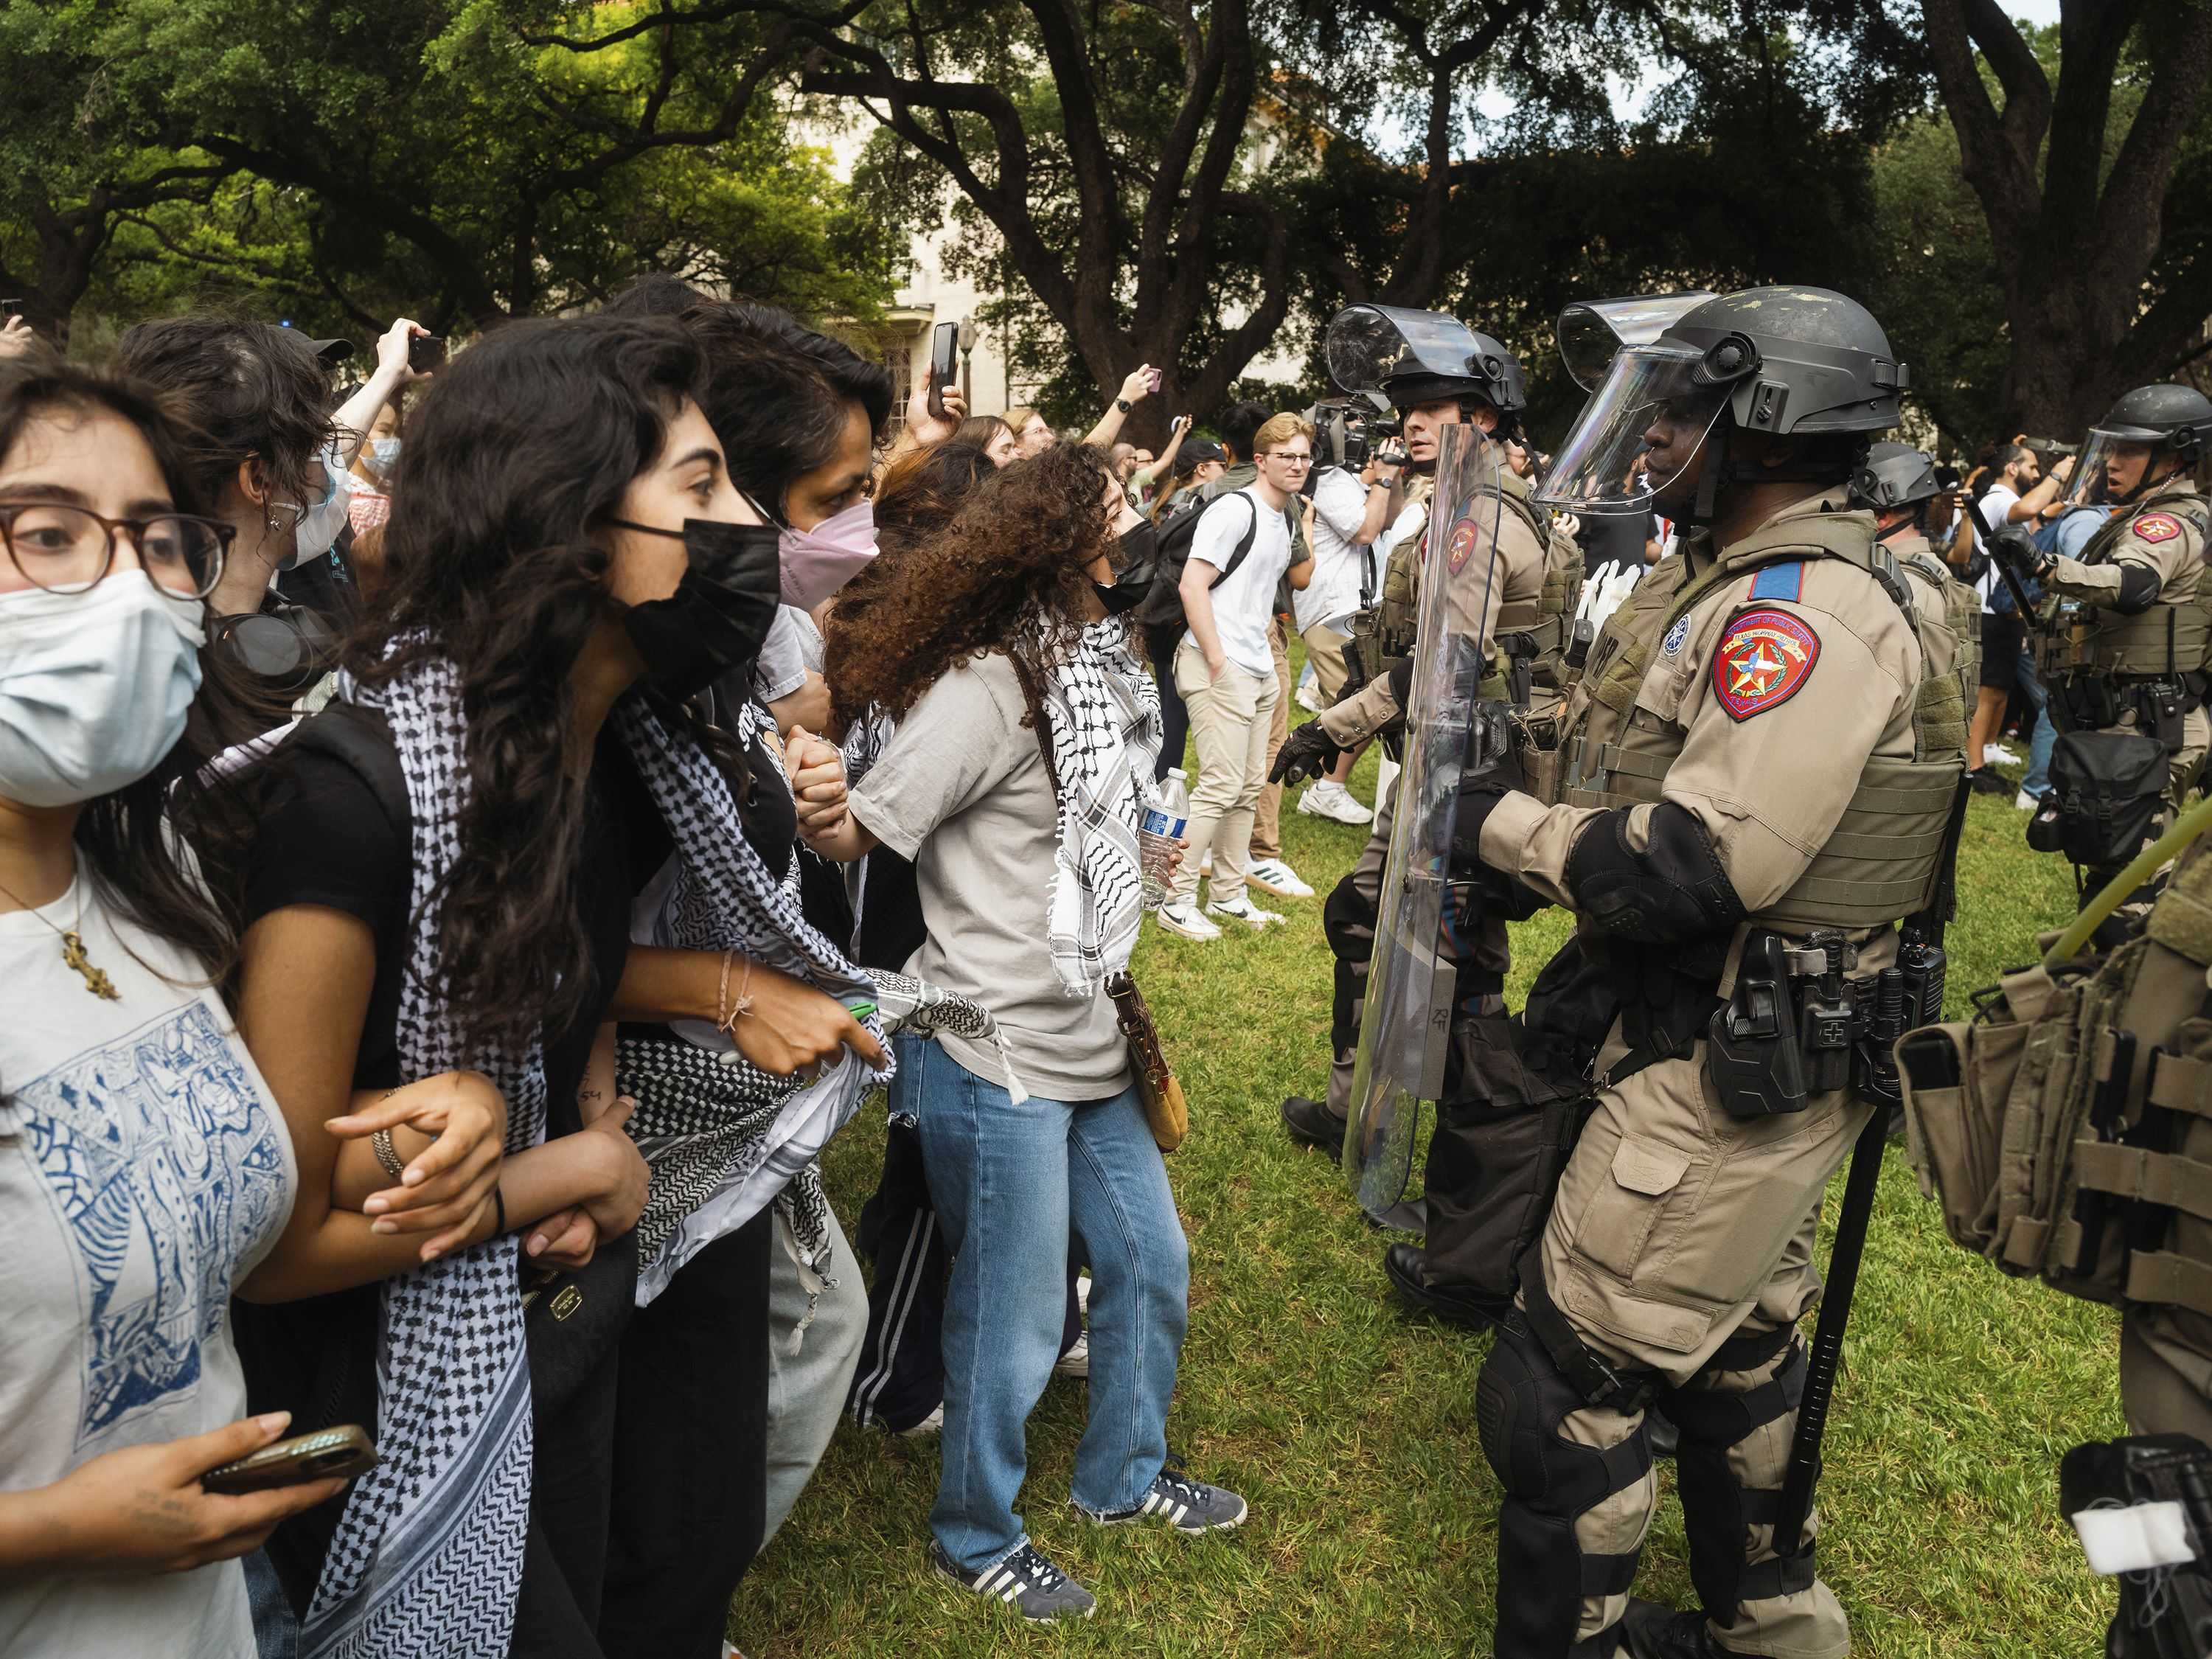 What we know about the protests erupting on college campuses across America